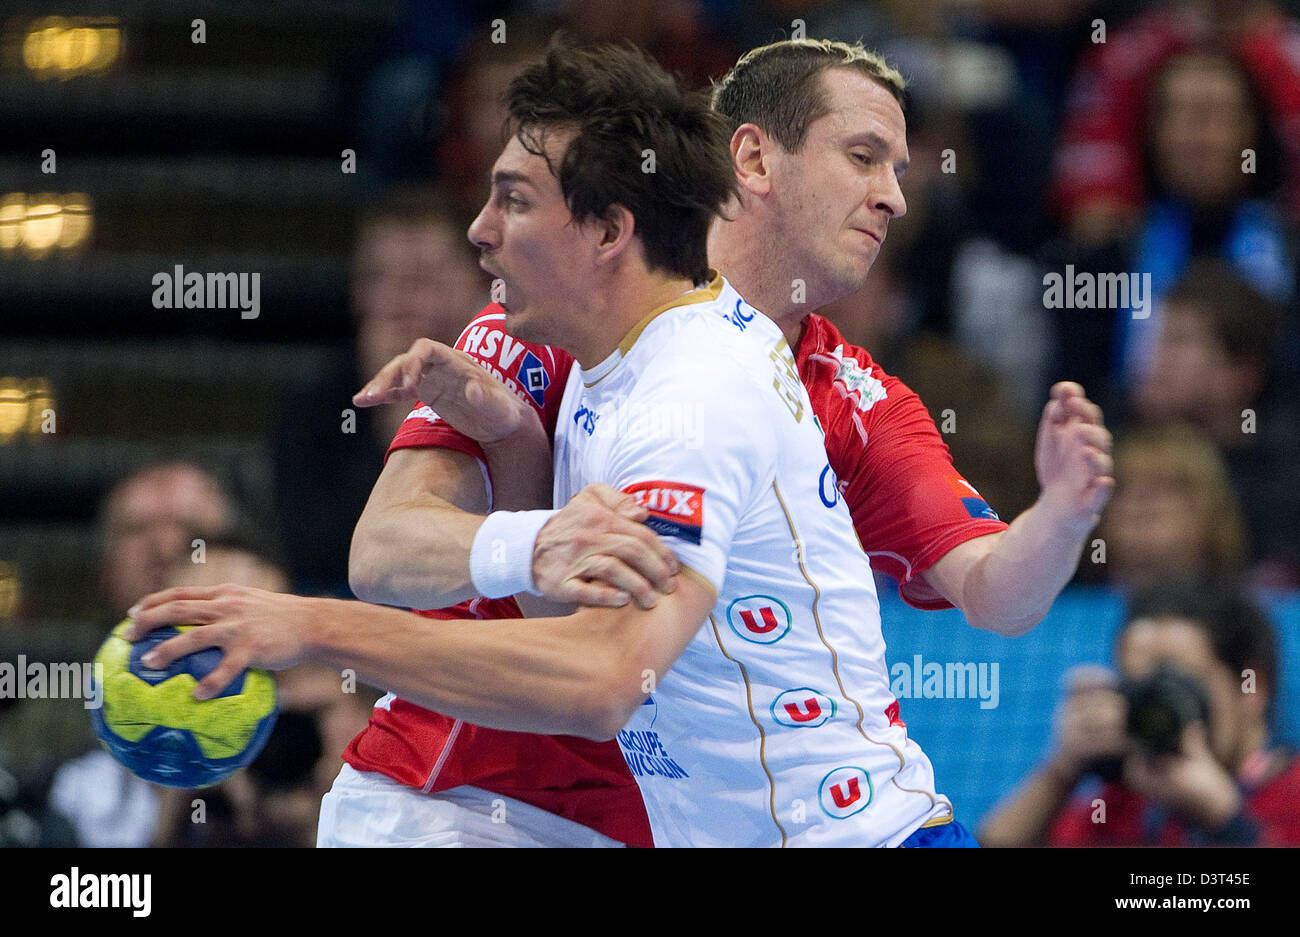 Hamburg, Germany, 23rd Feb, 2013. Montpellier's Antoine Gutfreund (front) and Hamburg's Pascal Hens fight for the ball during the match HSV Hamburg vs Montpellier AHB at the Handball Champions League in the O2 World stadium in Hamburg, Germany, 23 February 2013. Photo: Axel Heimken/dpa/Alamy Live News Stock Photo